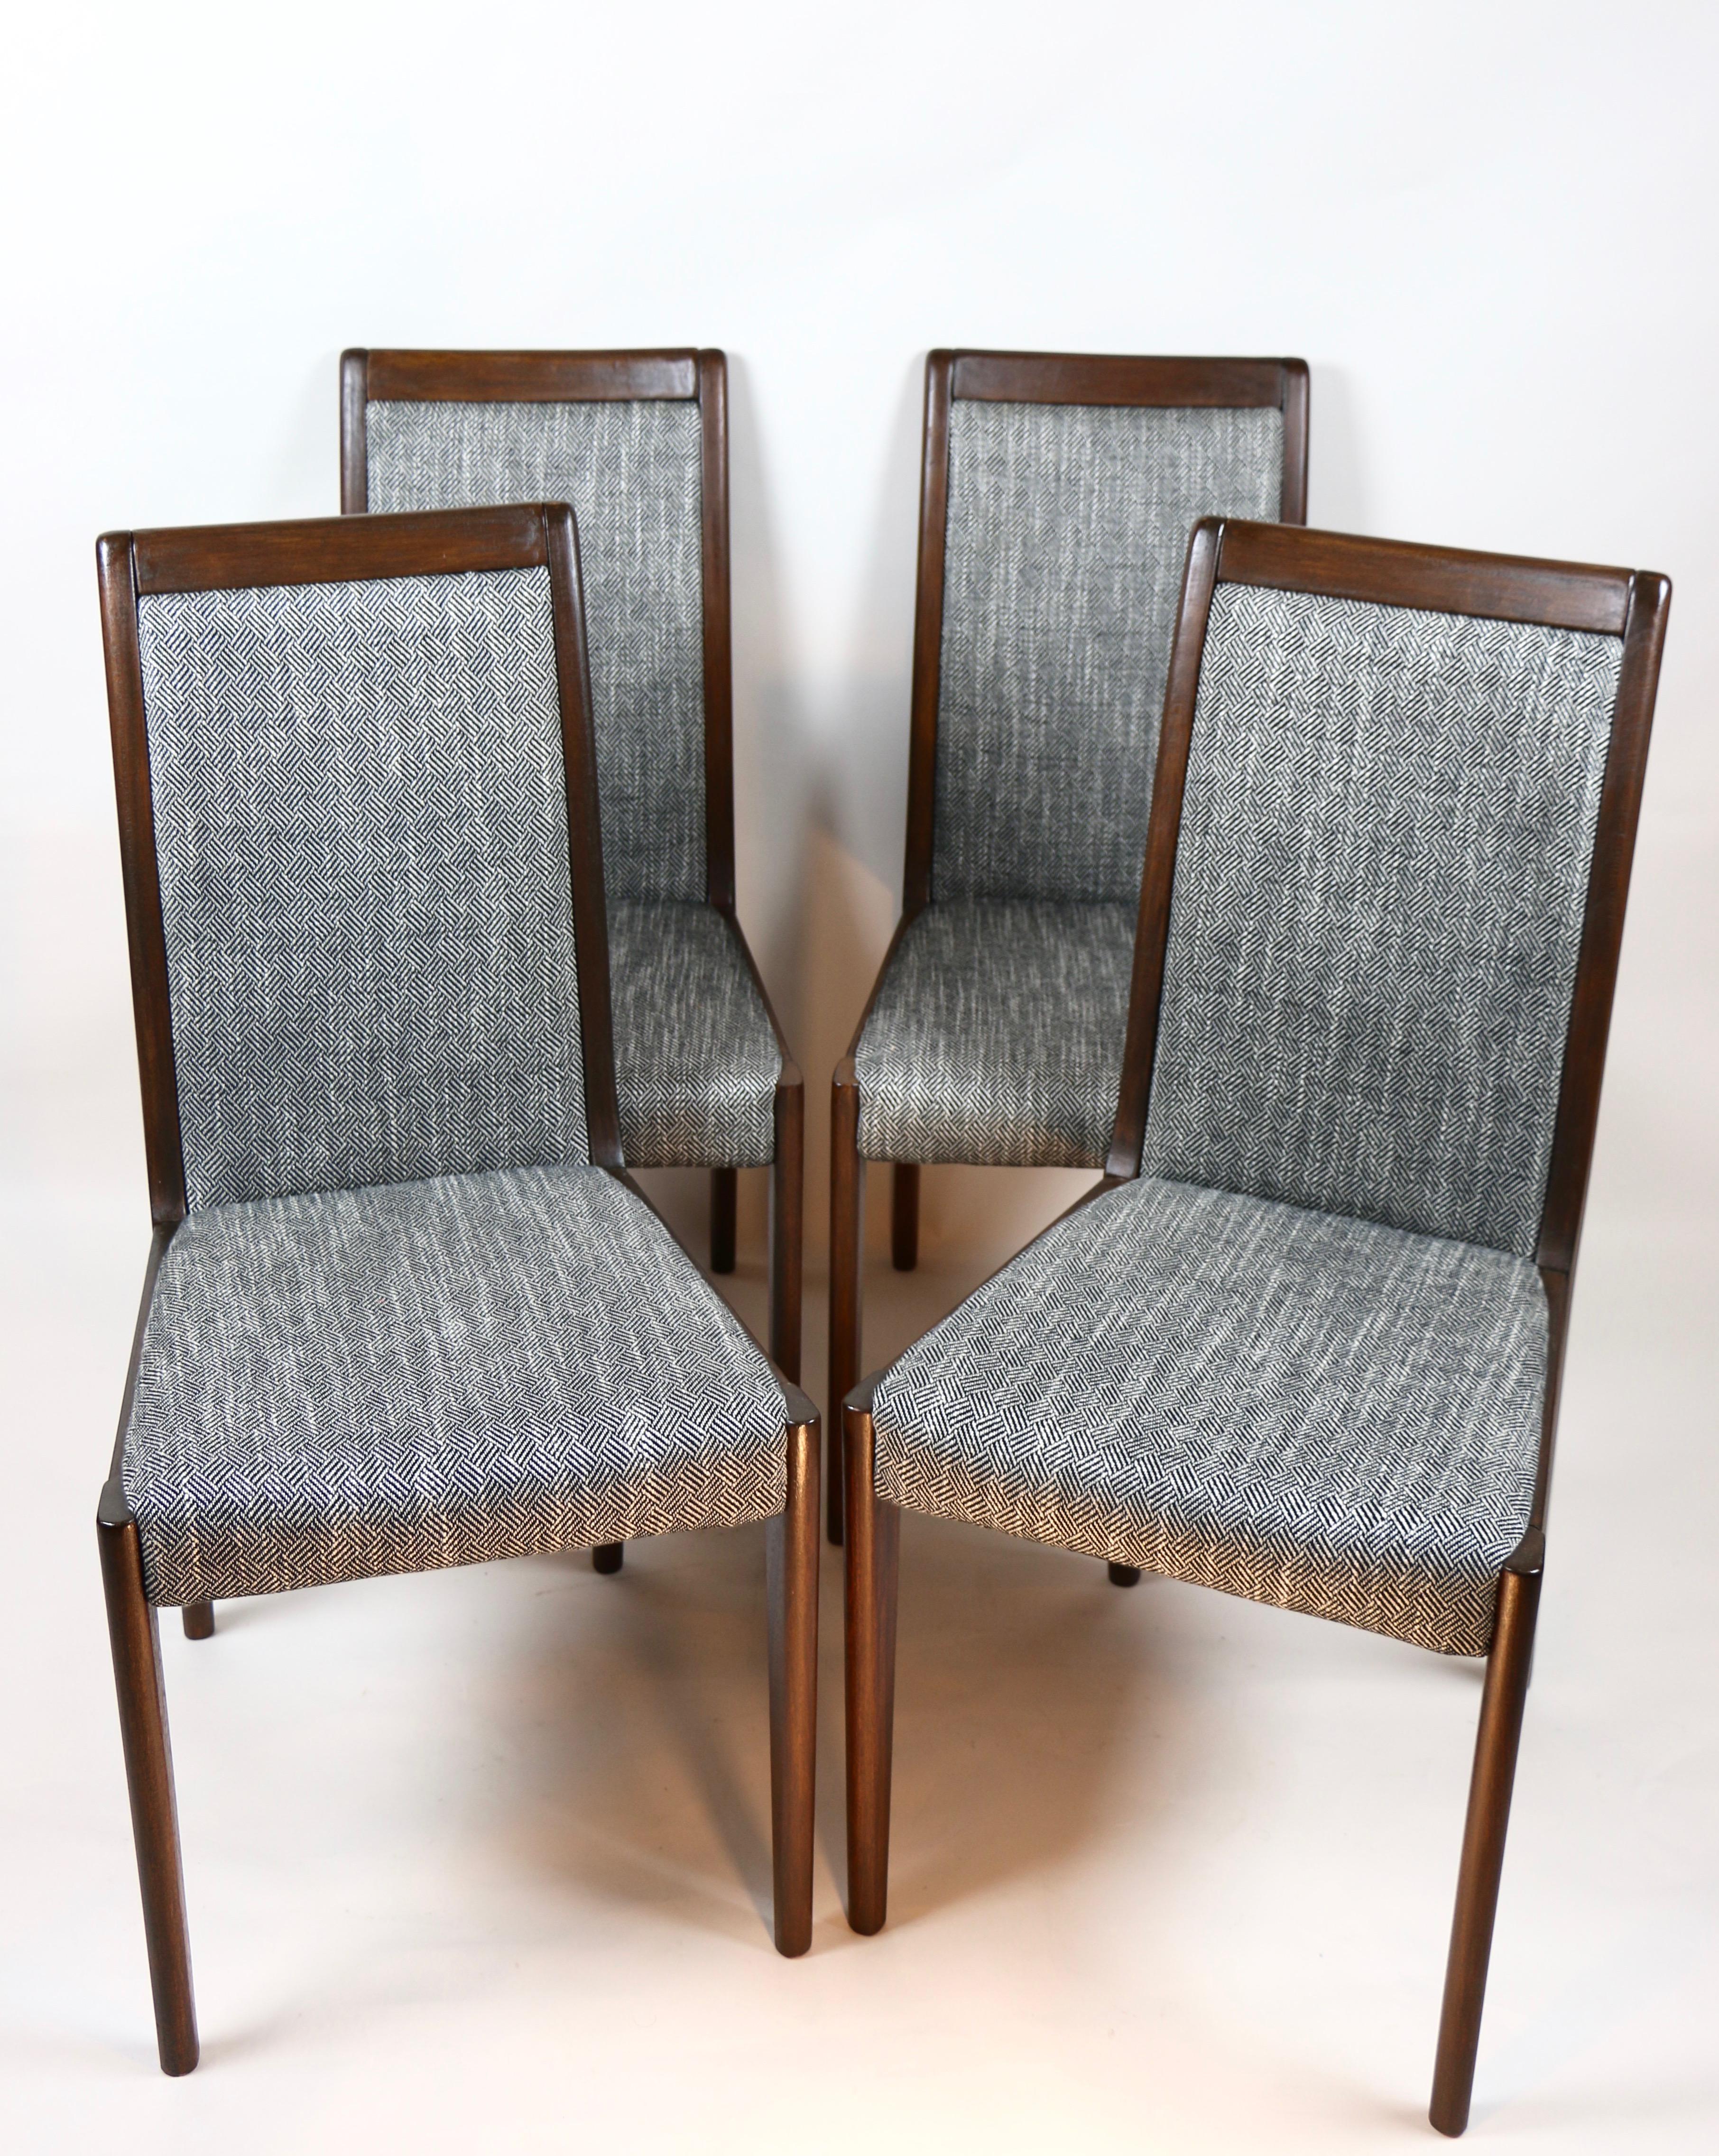 Set of 4 German Casala chairs in black and white natural fabric from 1980s, completely restored, new upholstery covered with fabric in herringbone fashionable color.
Headquarters has received new upholstery covered. Wooden elements finished with